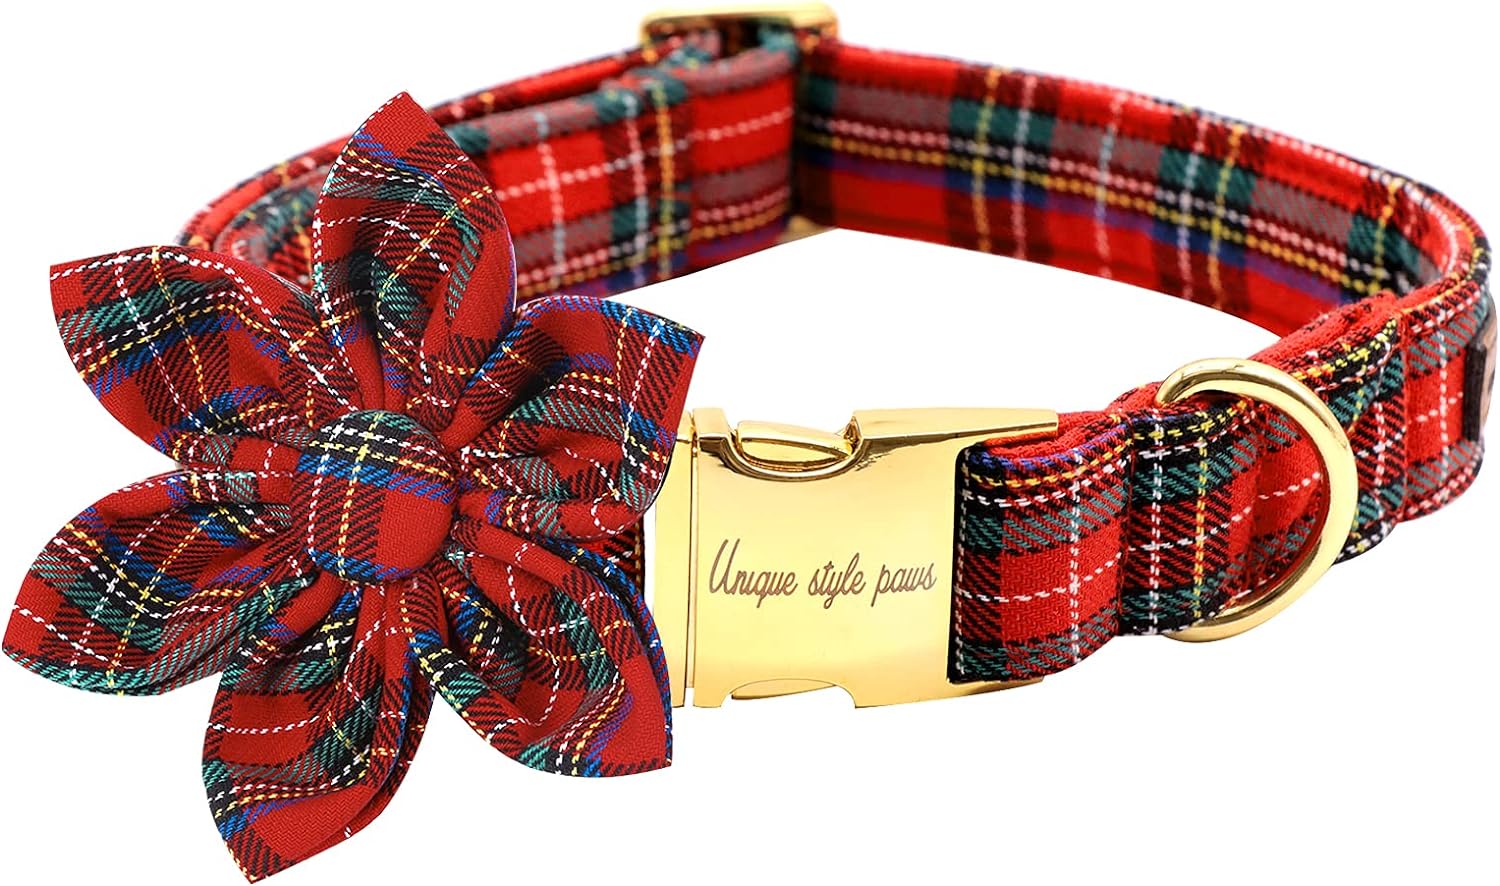 Unique Style Paws Christmas Dog Collar with Flower